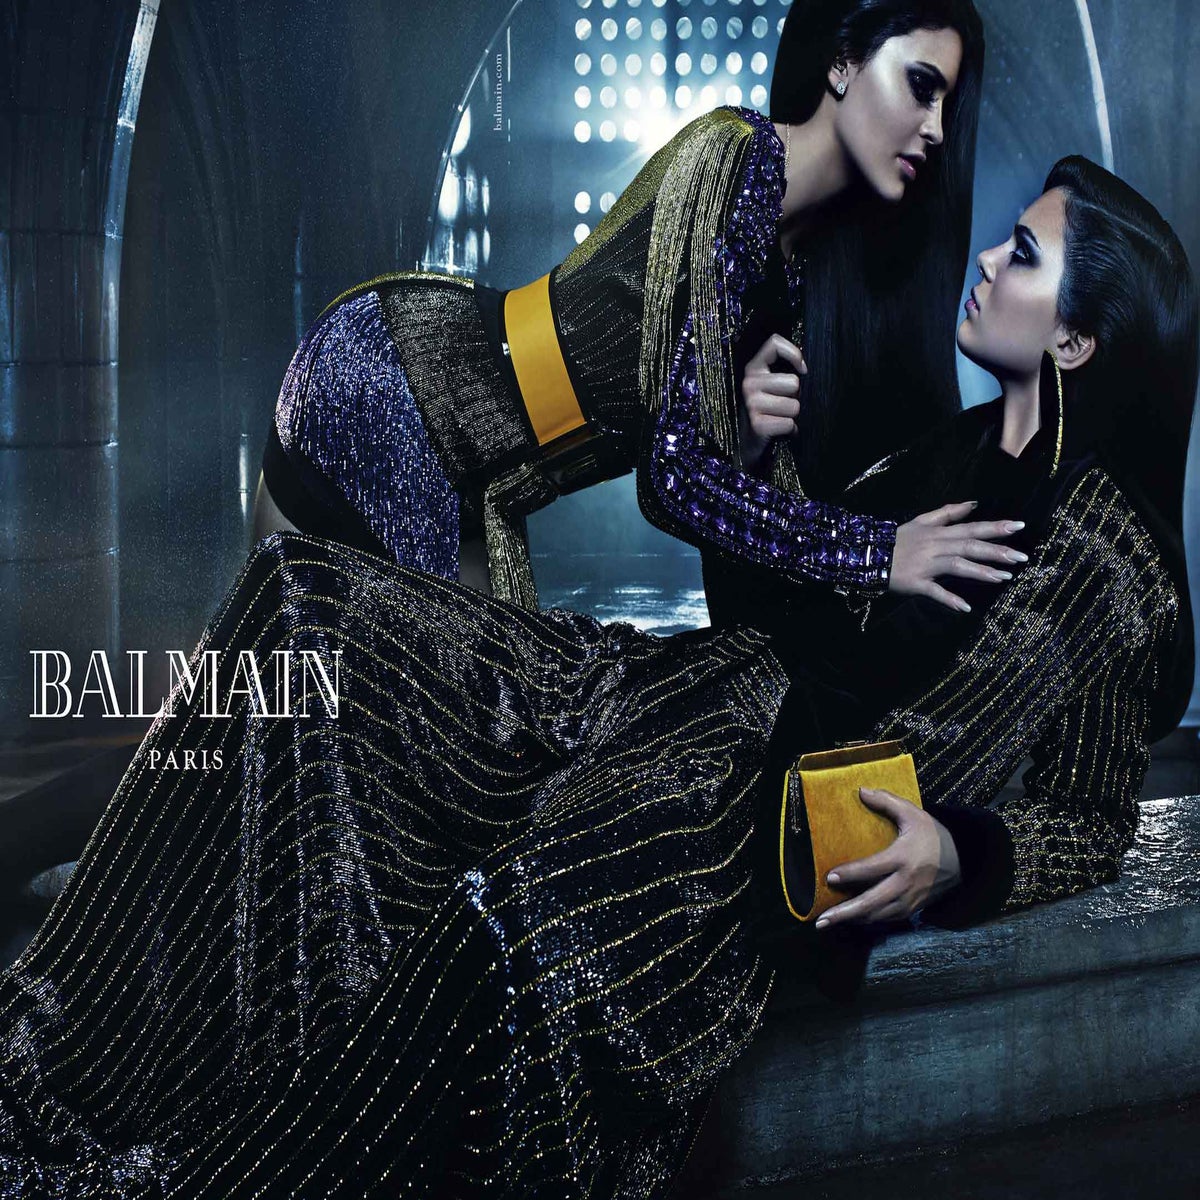 Double trouble: Kendall and Kylie Jenner star in sister-themed Balmain  campaign, The Independent